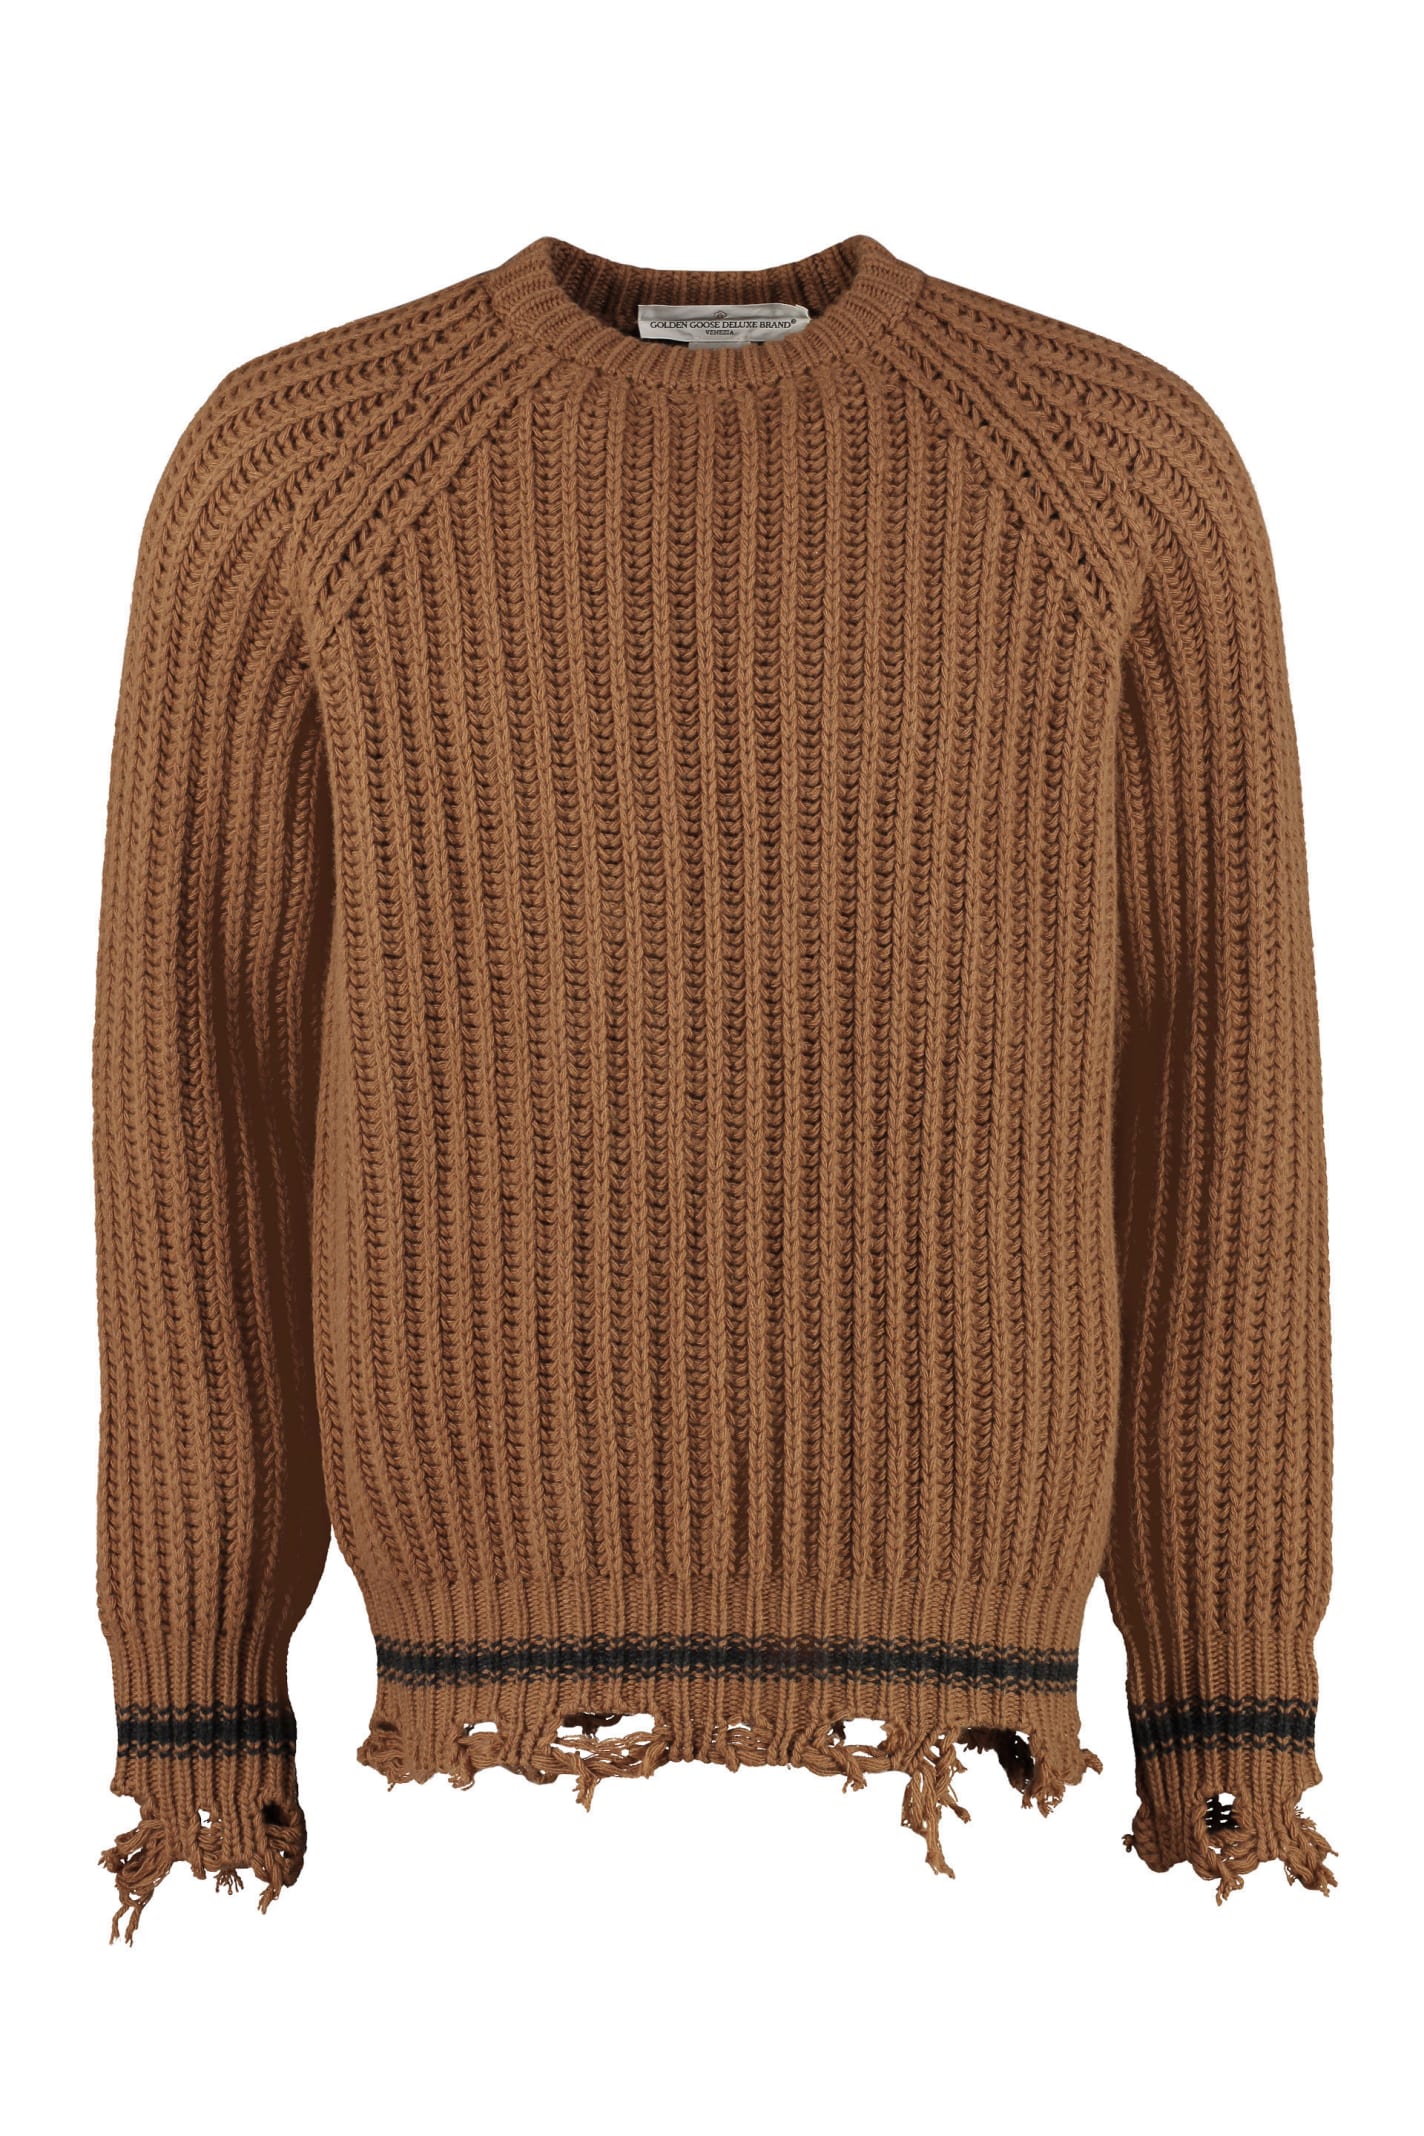 Golden Goose Ribbed Wool Sweater